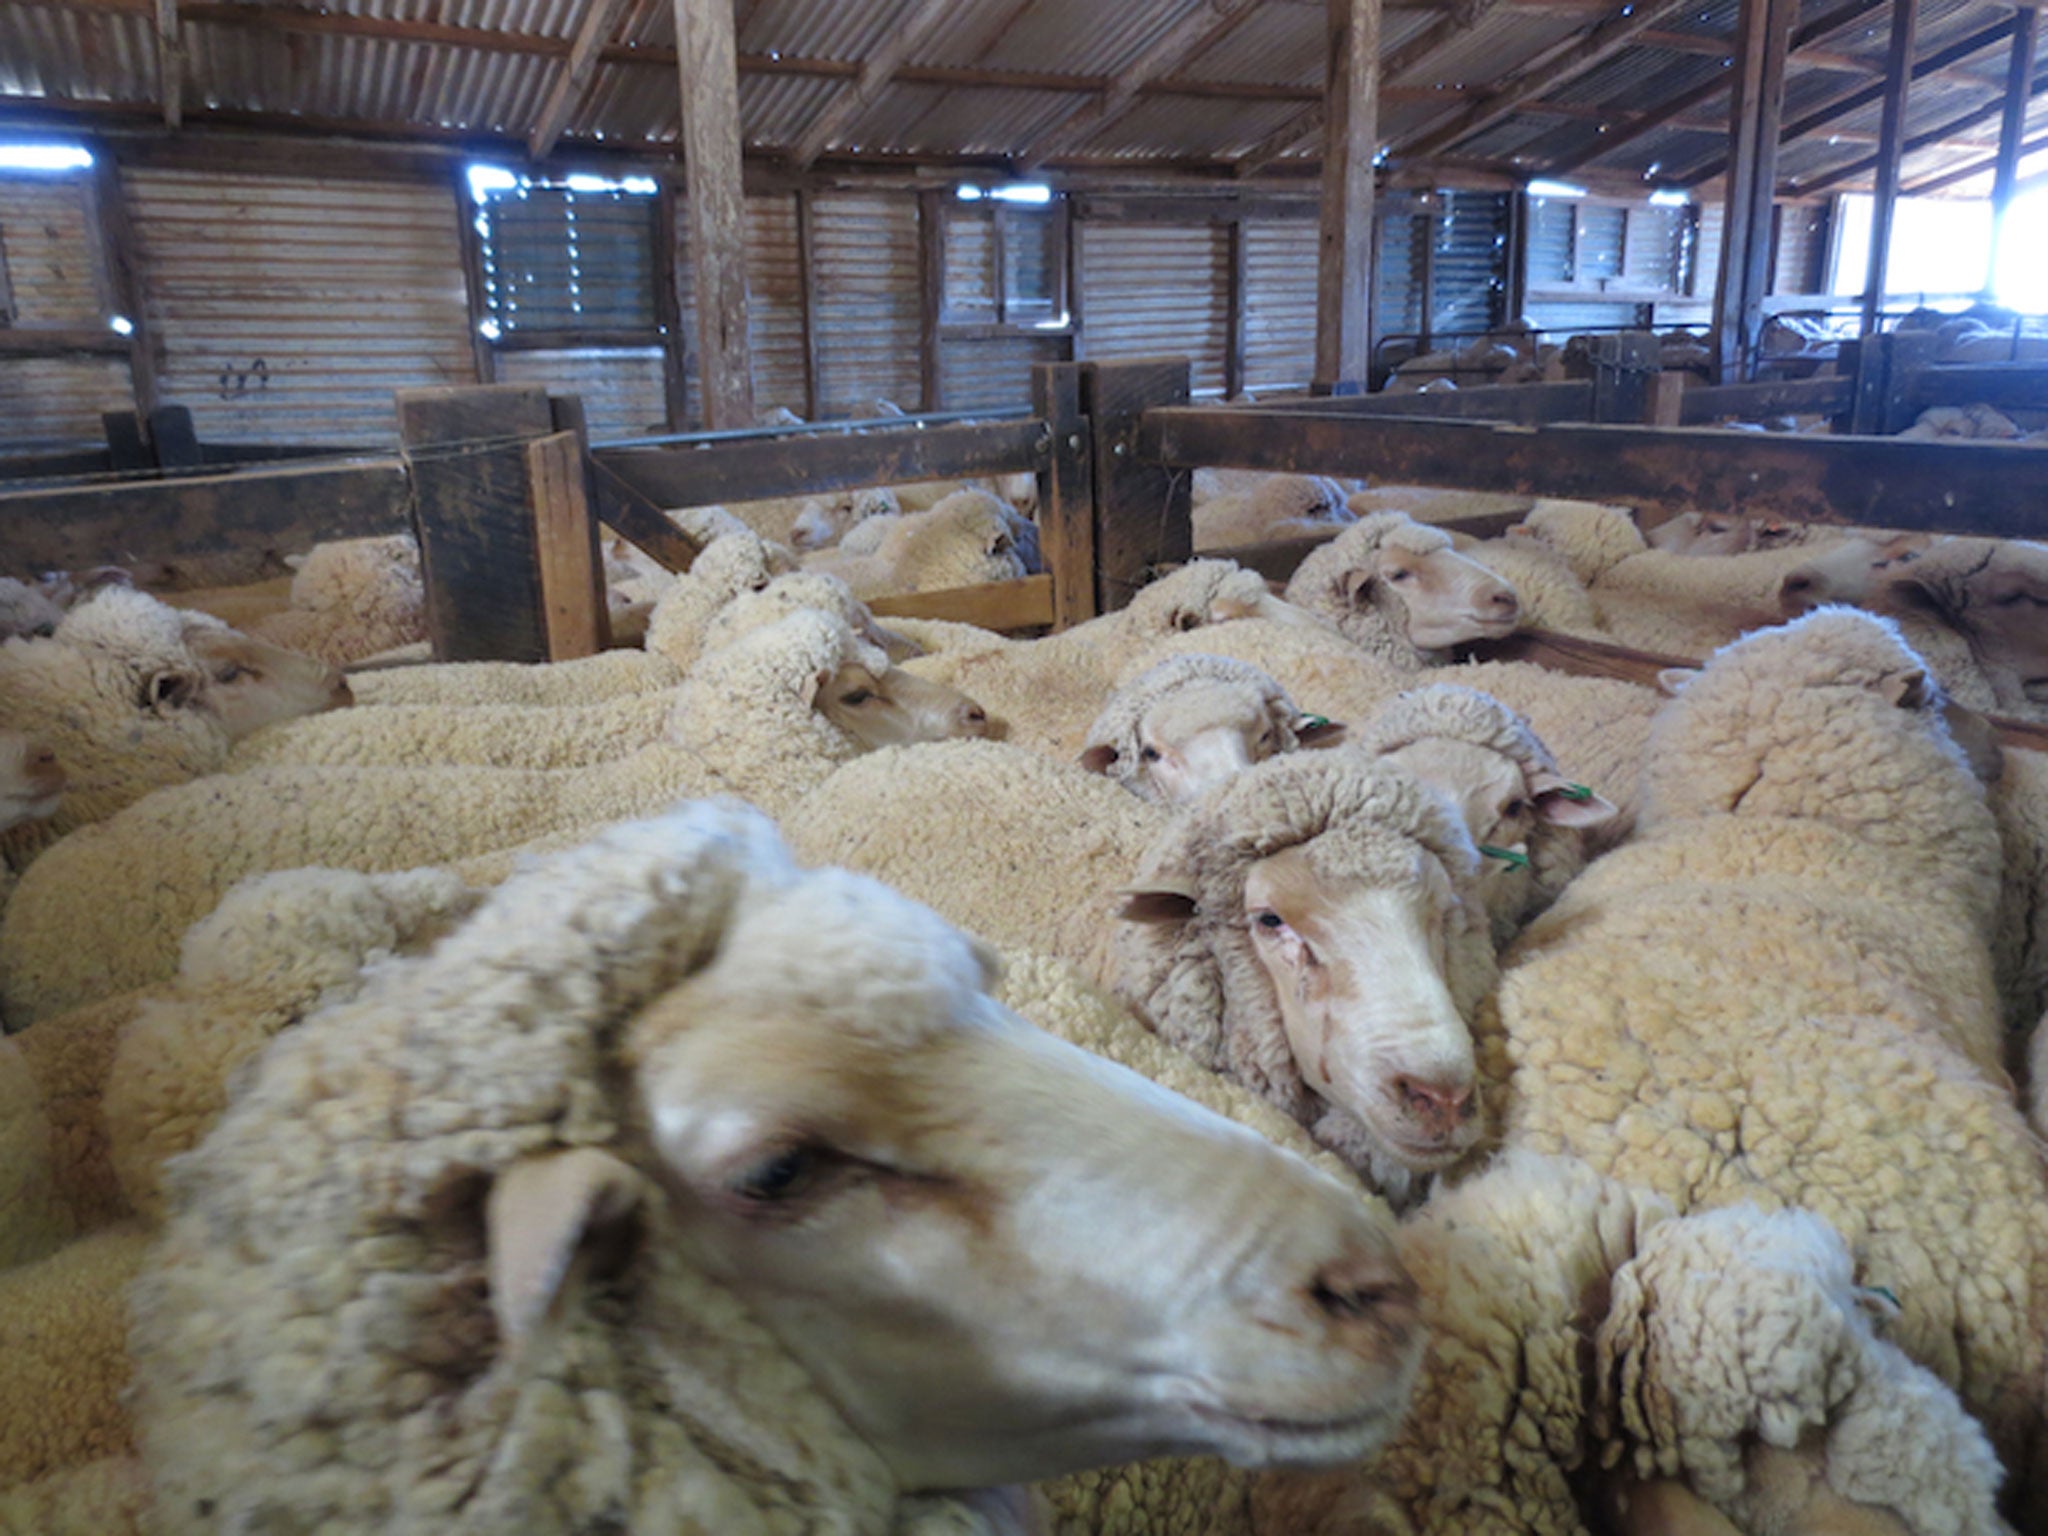 Peta said sheep are deprived of food and water, sometimes overnight, in part so that they'll put up less resistance when shearers handle them roughly